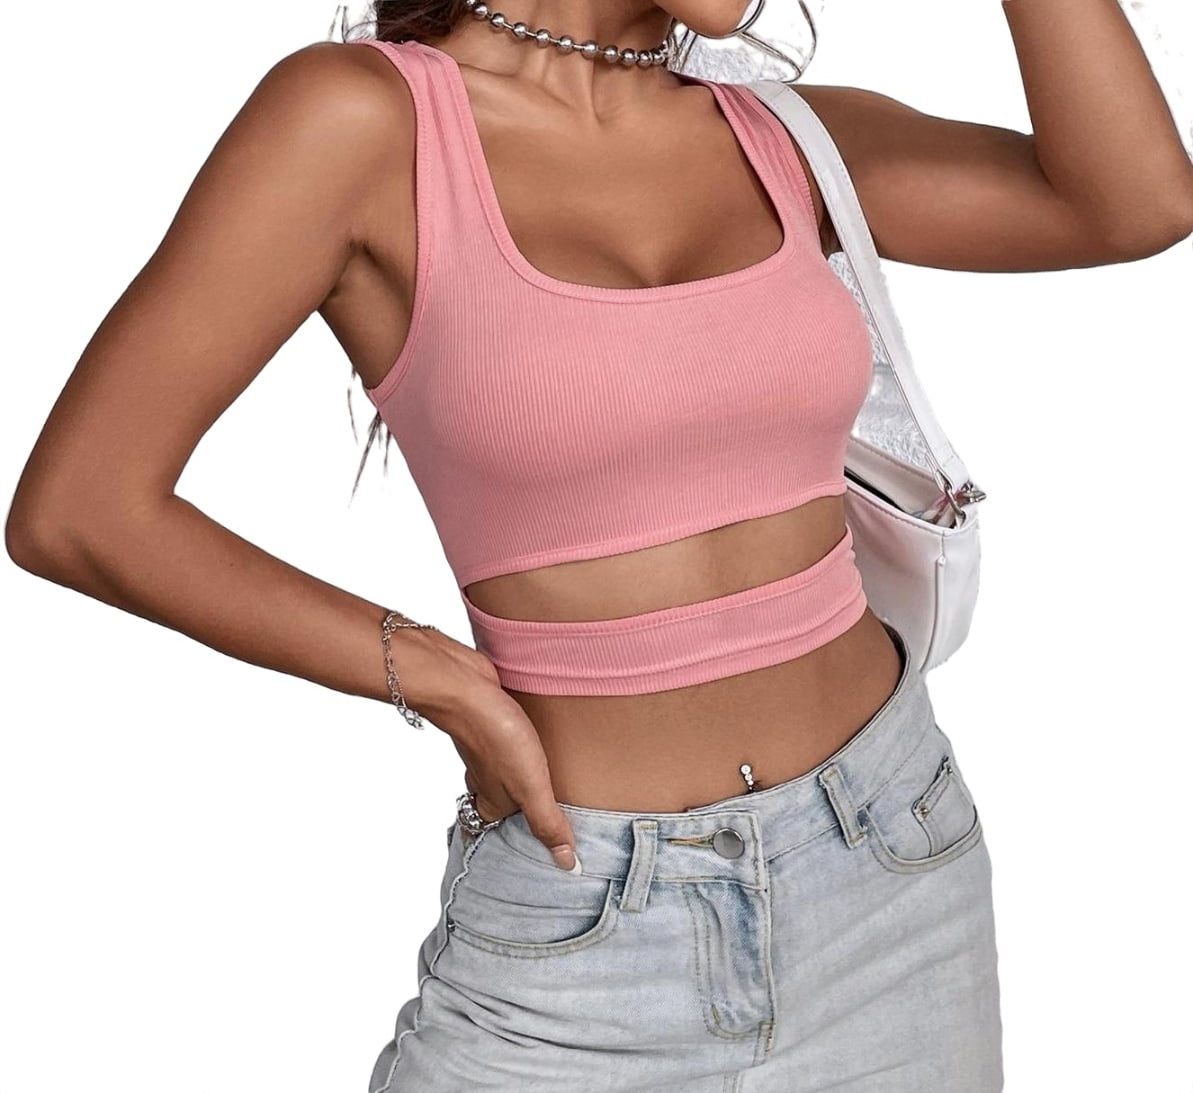 MNBCCXC Cute Sexy Tops For Women Crop Tanks For Women Womens Tanks And  Camis Women'S Tank Tops Plus Size Clearance Items Under 1 Dollar Today  Delivery Items Prime Deal Of The Day